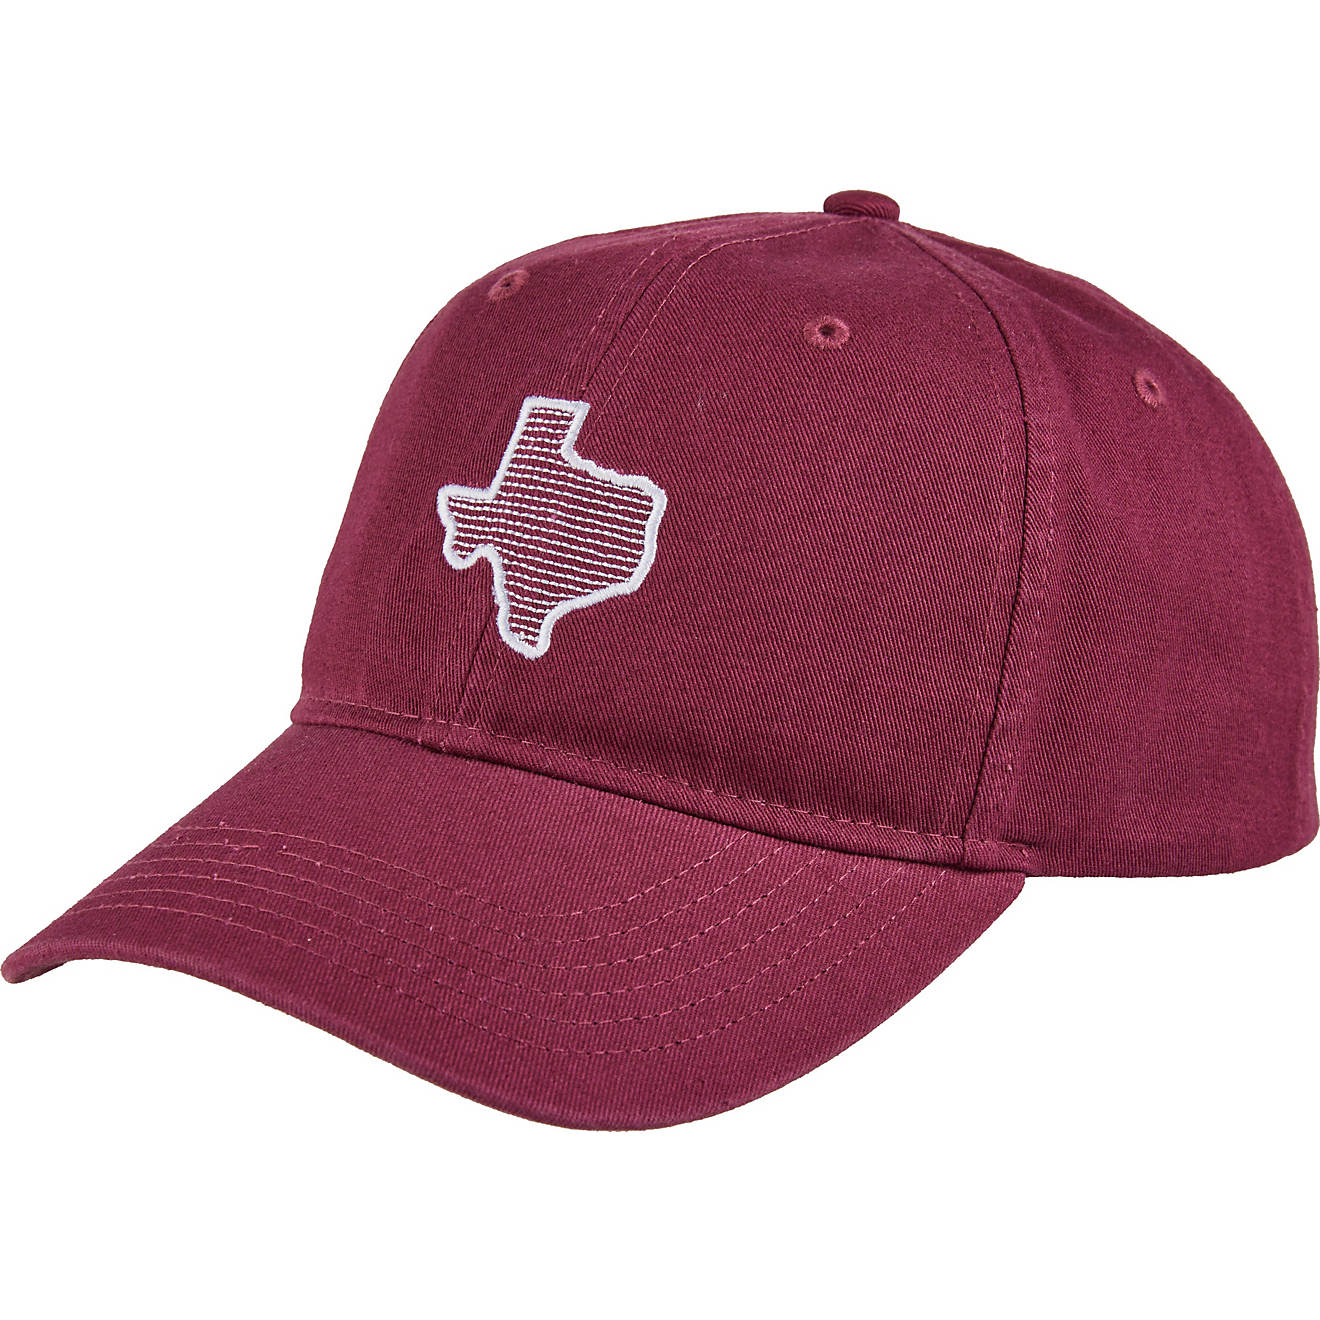 Academy Sports + Outdoors Men's Texas Cap                                                                                        - view number 1